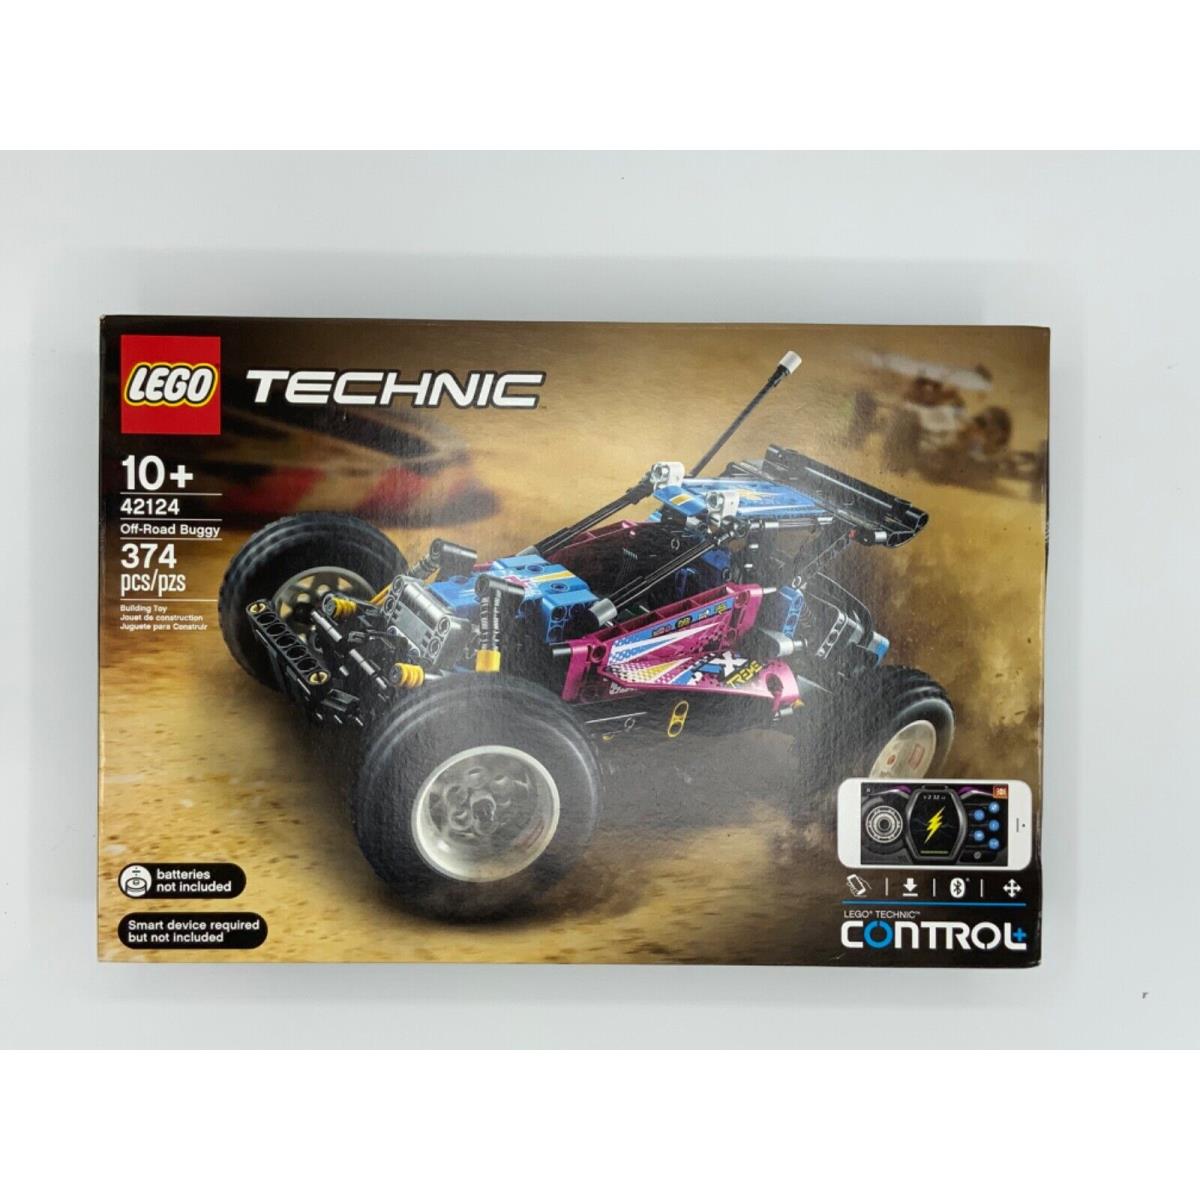 Lego 42124 Technic Off-road Buggy RC 374 Pieces